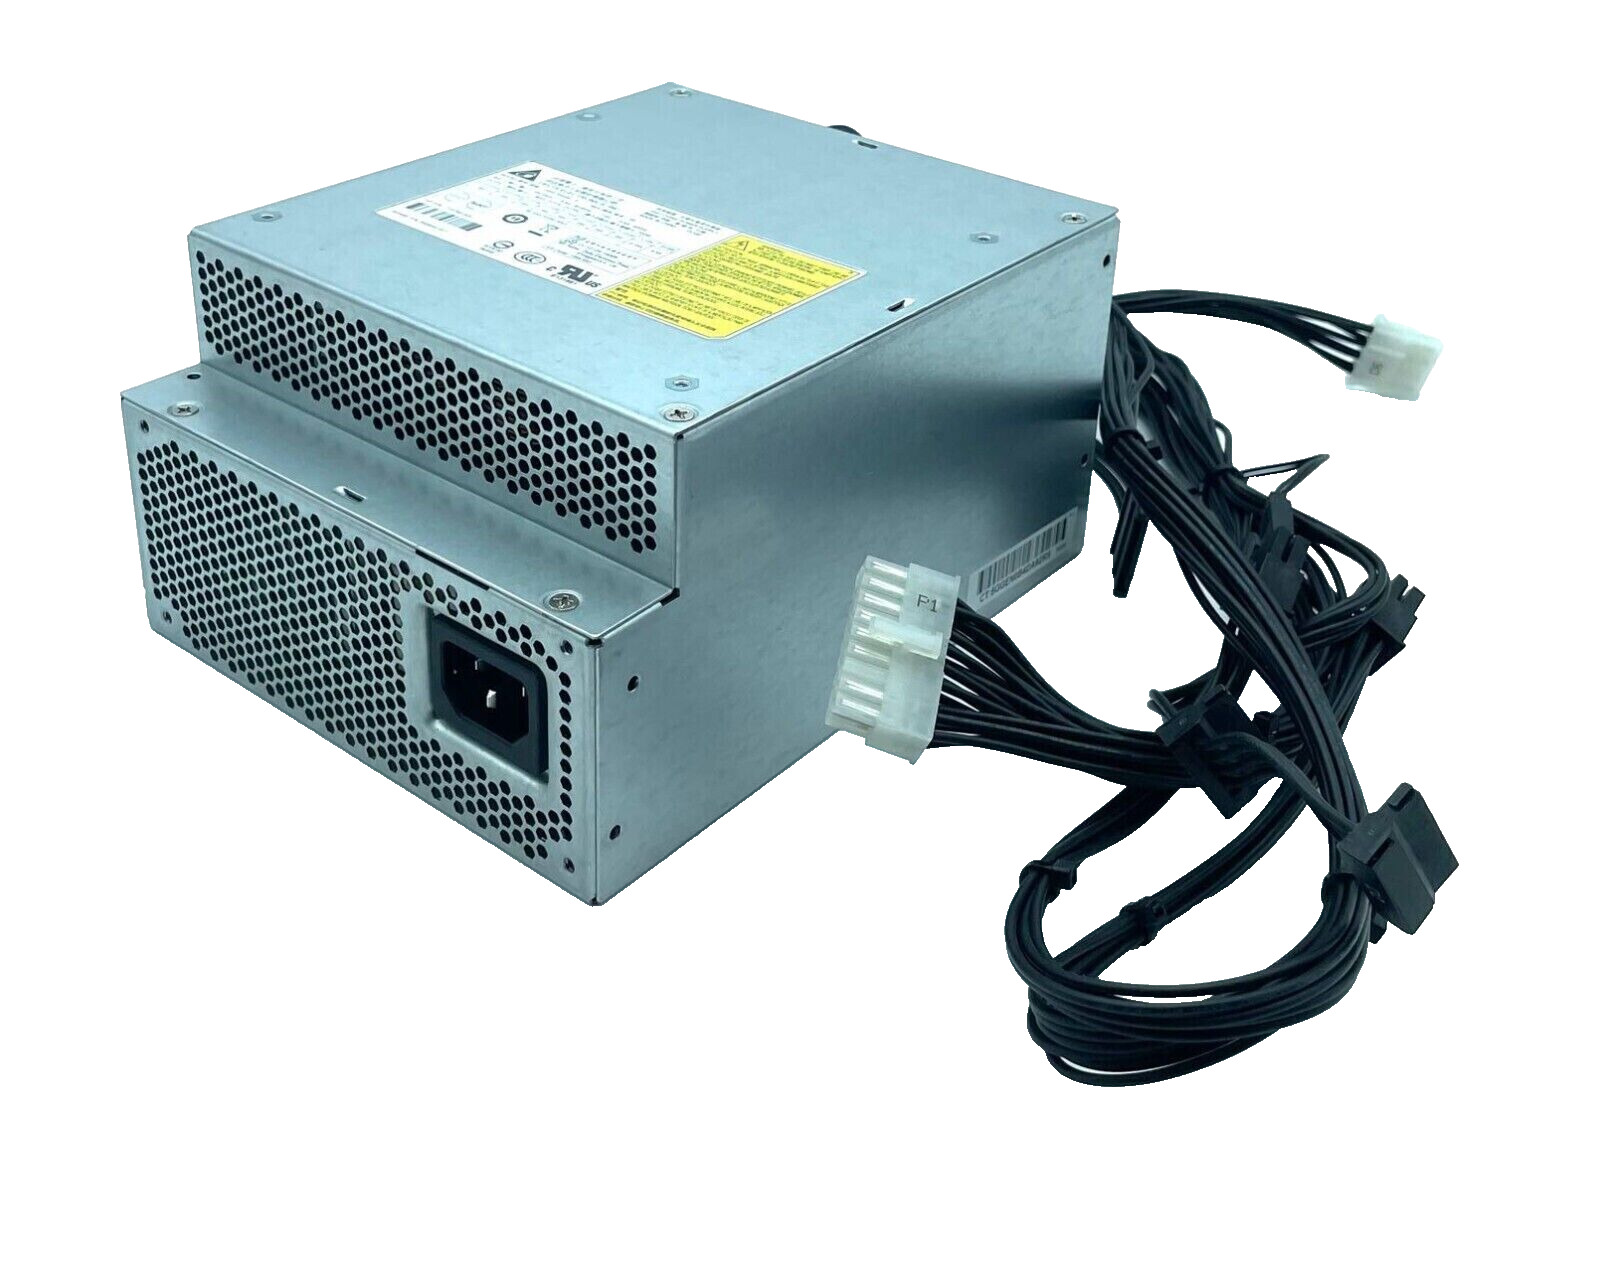 For HP Z440 Workstation 700W Power Supply DPS-700AB-1 A 719795-004 858854-001